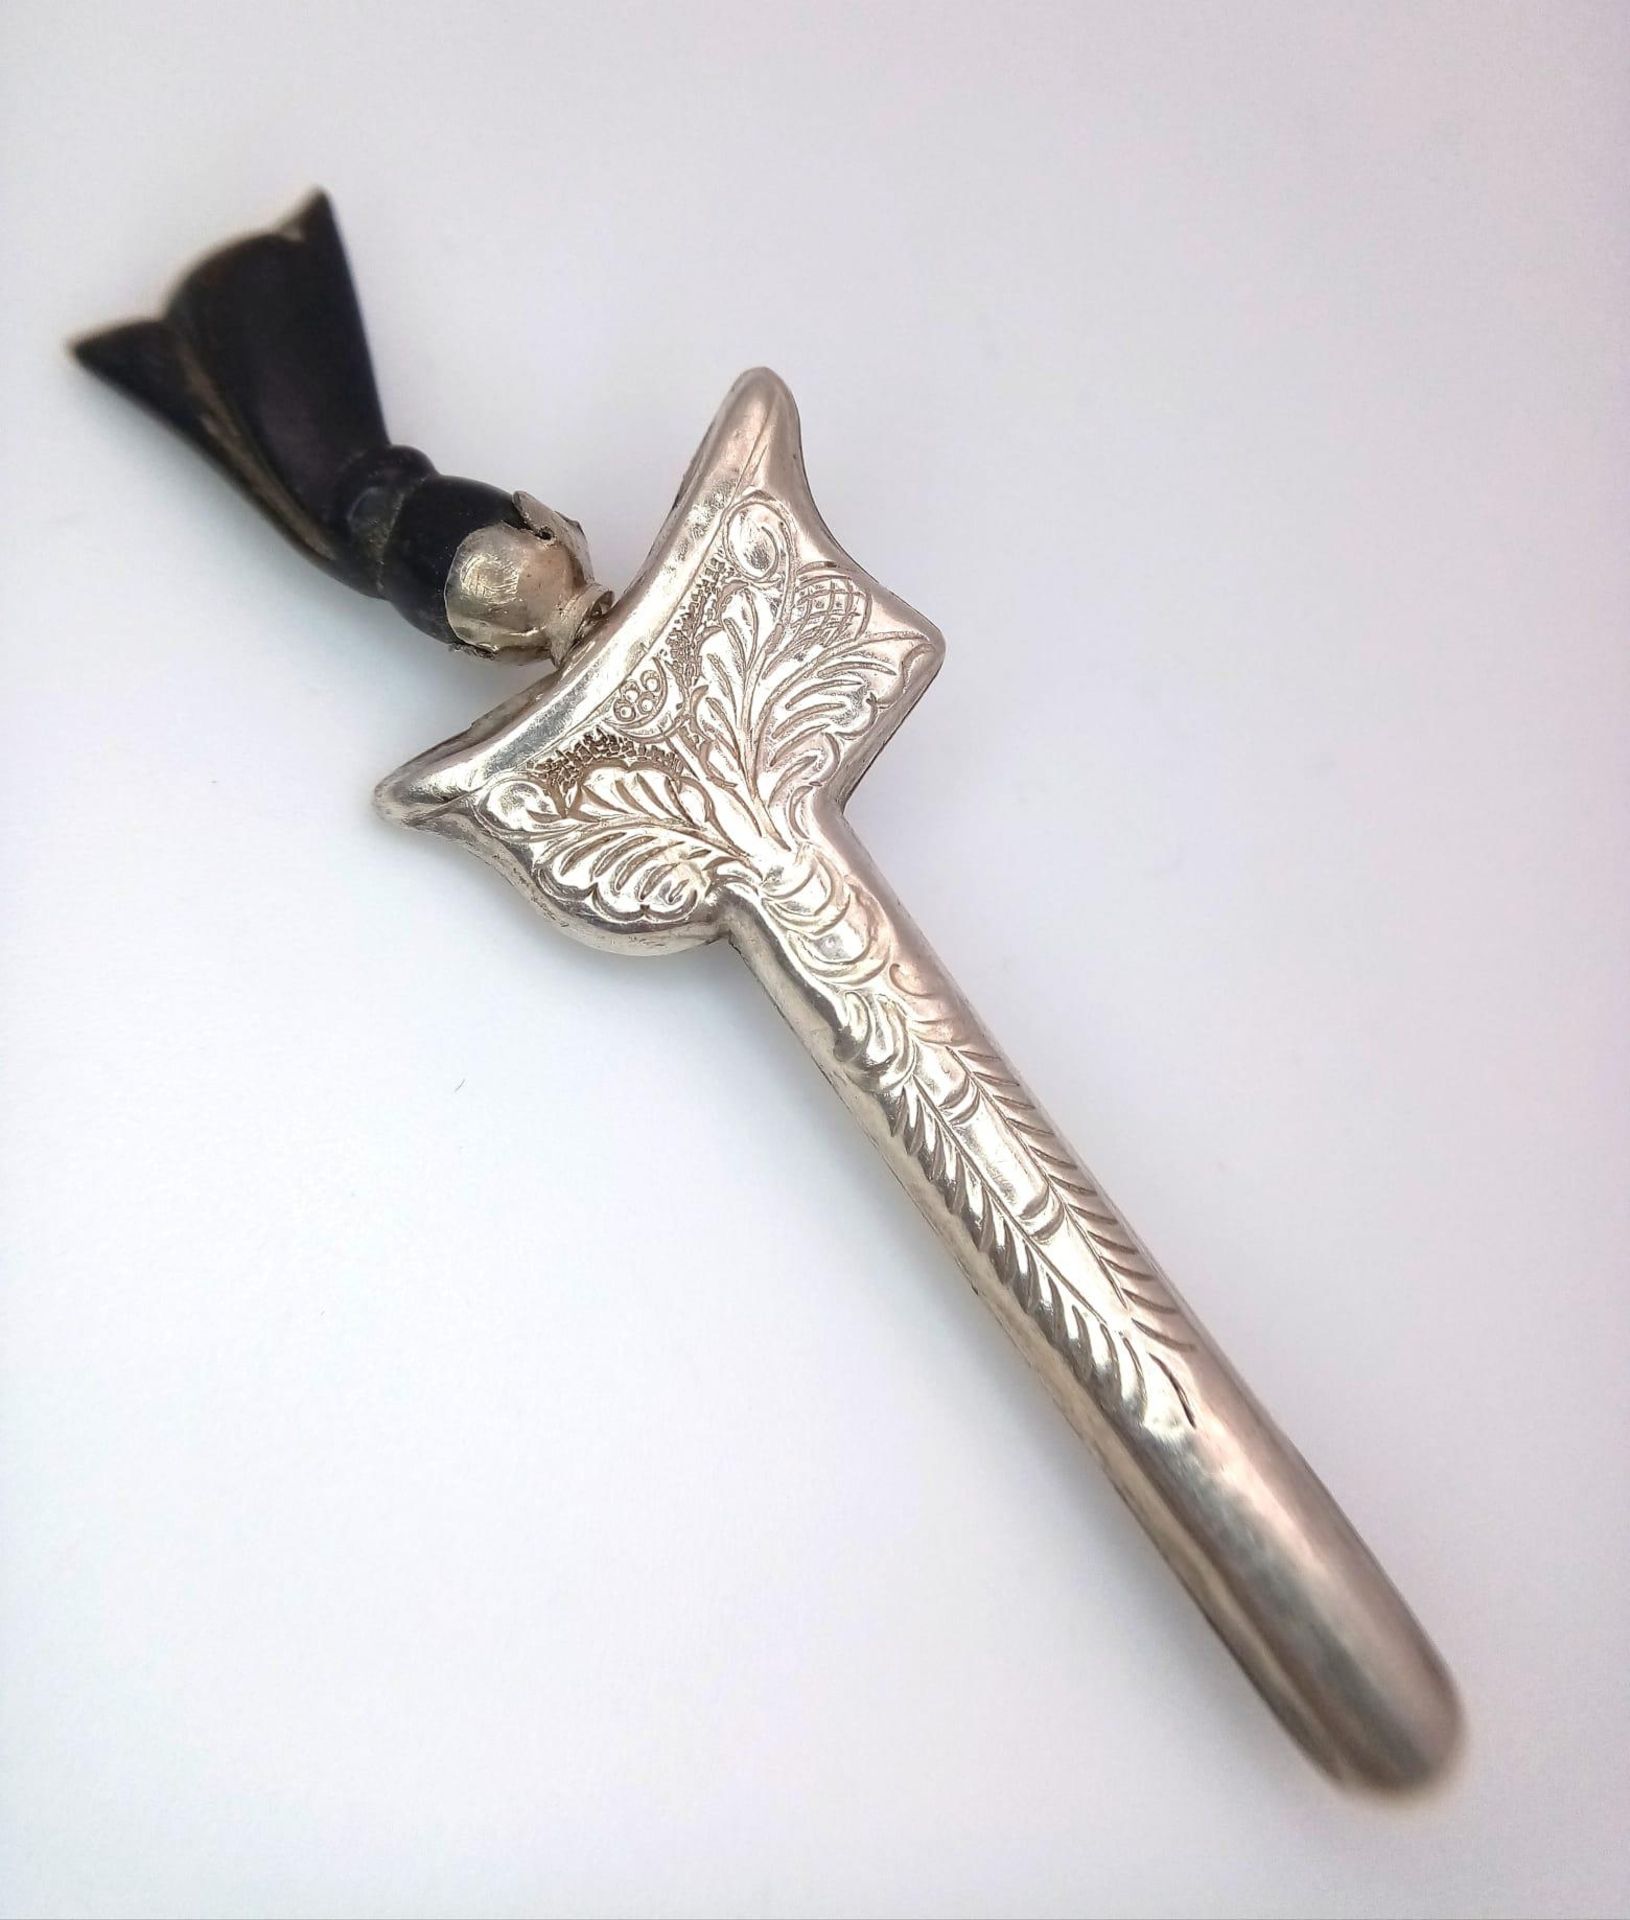 A Vintage or Antique Silver and Horn Handle Kris Knife and Sheathe Bar Brooch. Knife is